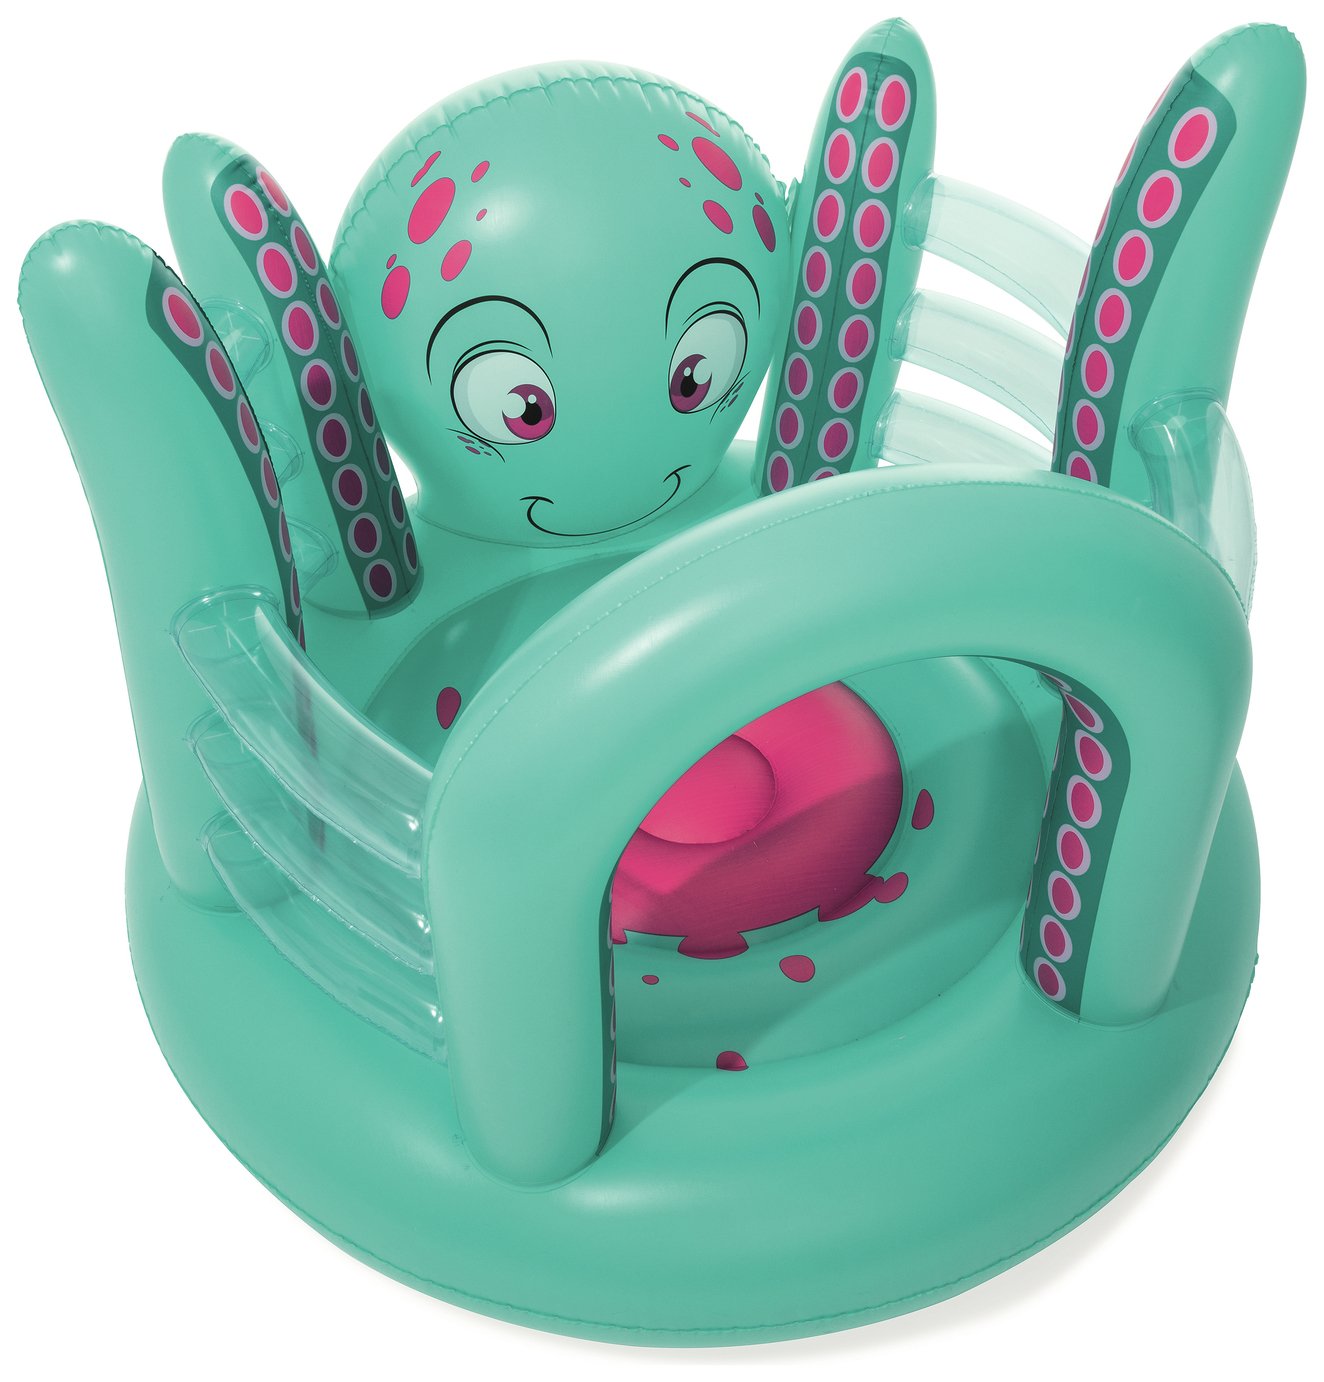 Chad Valley Octopus Bouncer Review